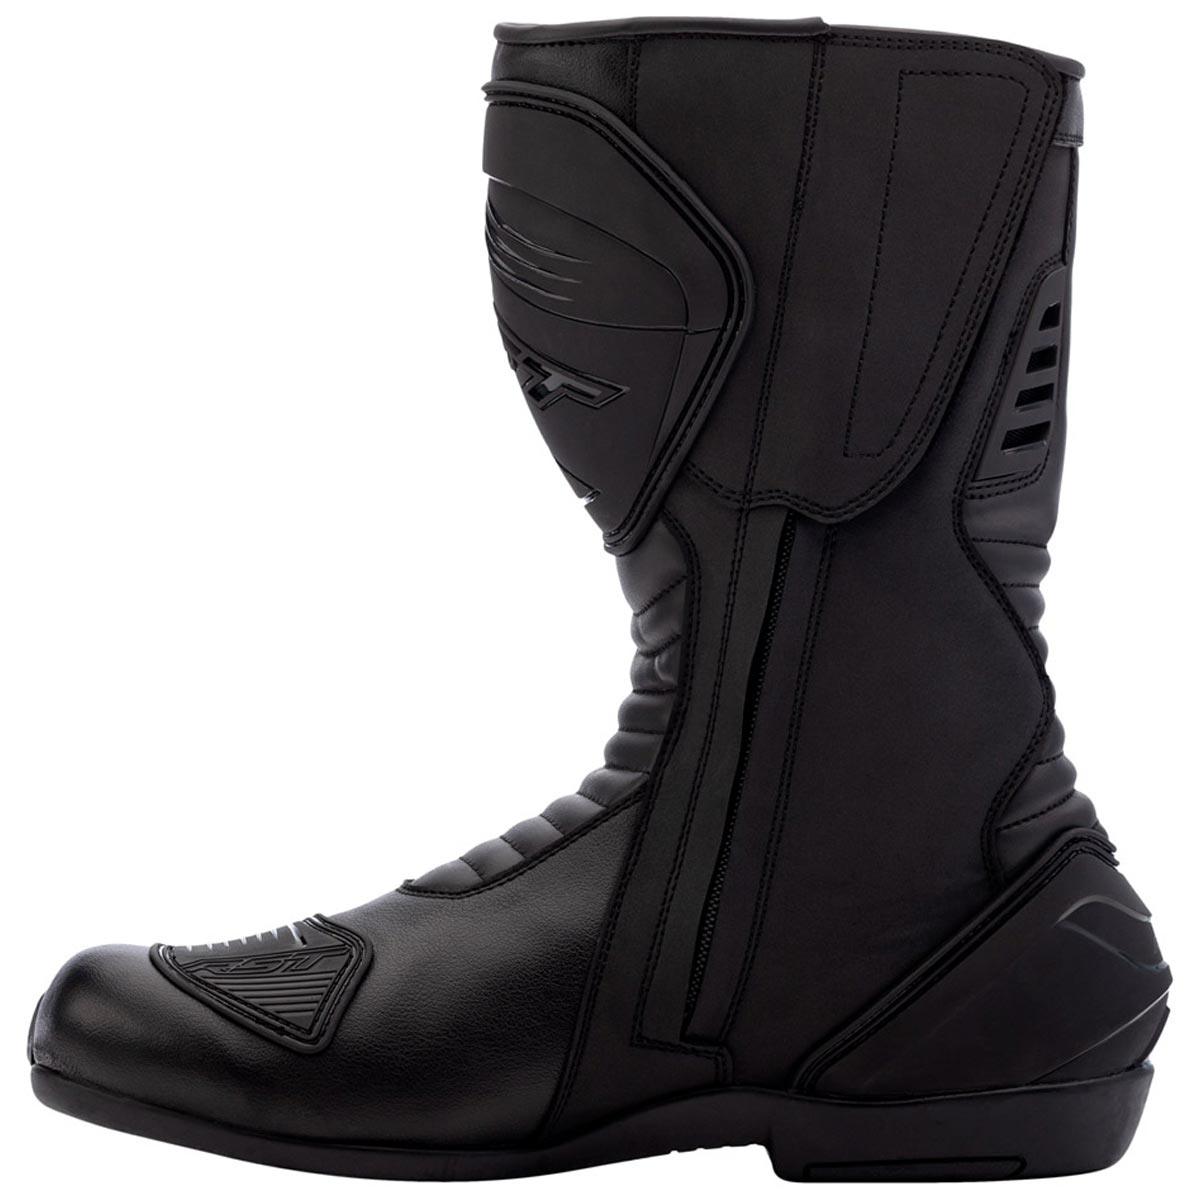 RST S1 Boots CE  - Motorcycle Footwear